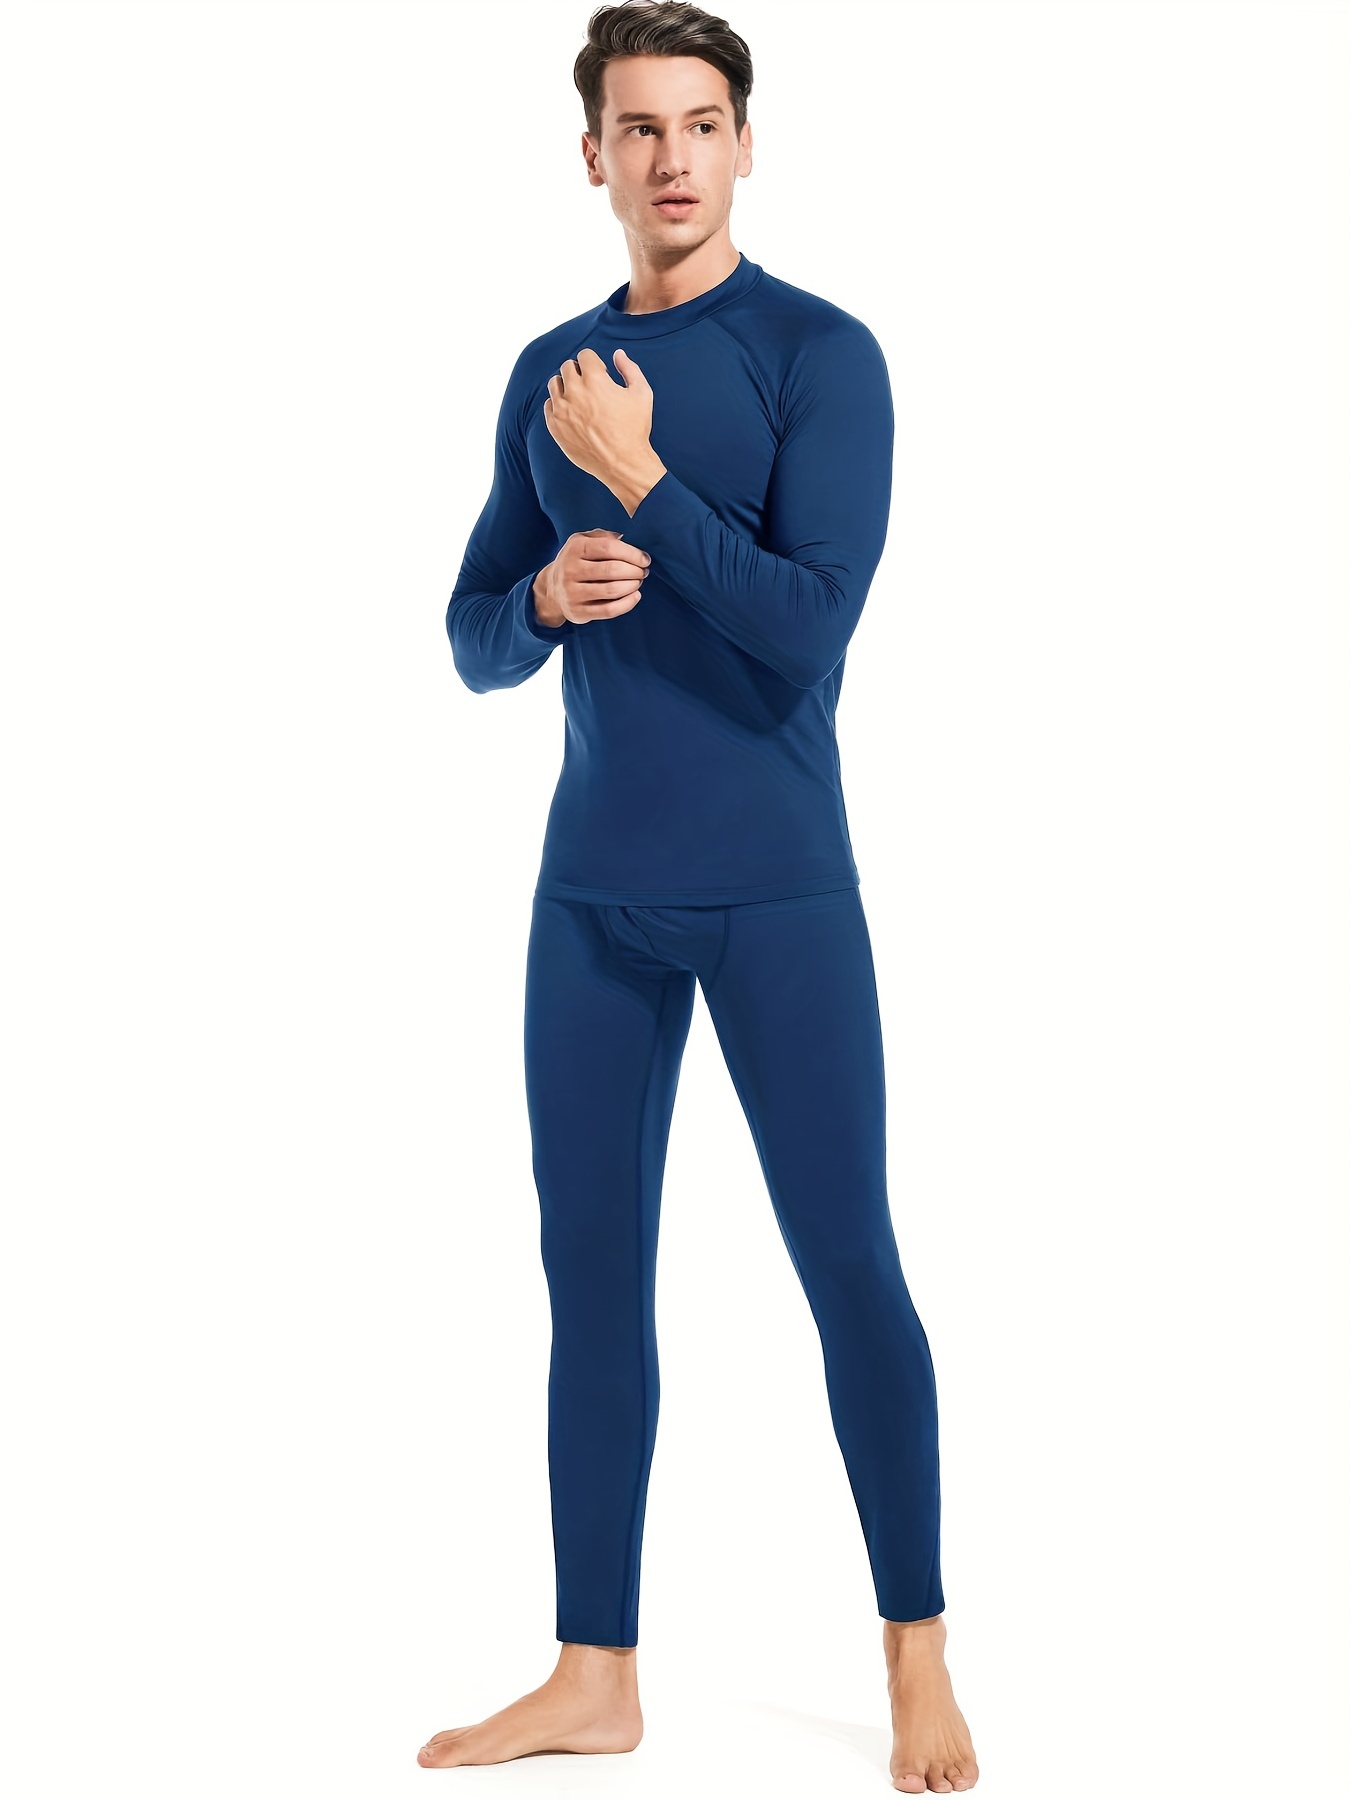 Men's High Stretch, Warm And Breathable Thermal Leggings With